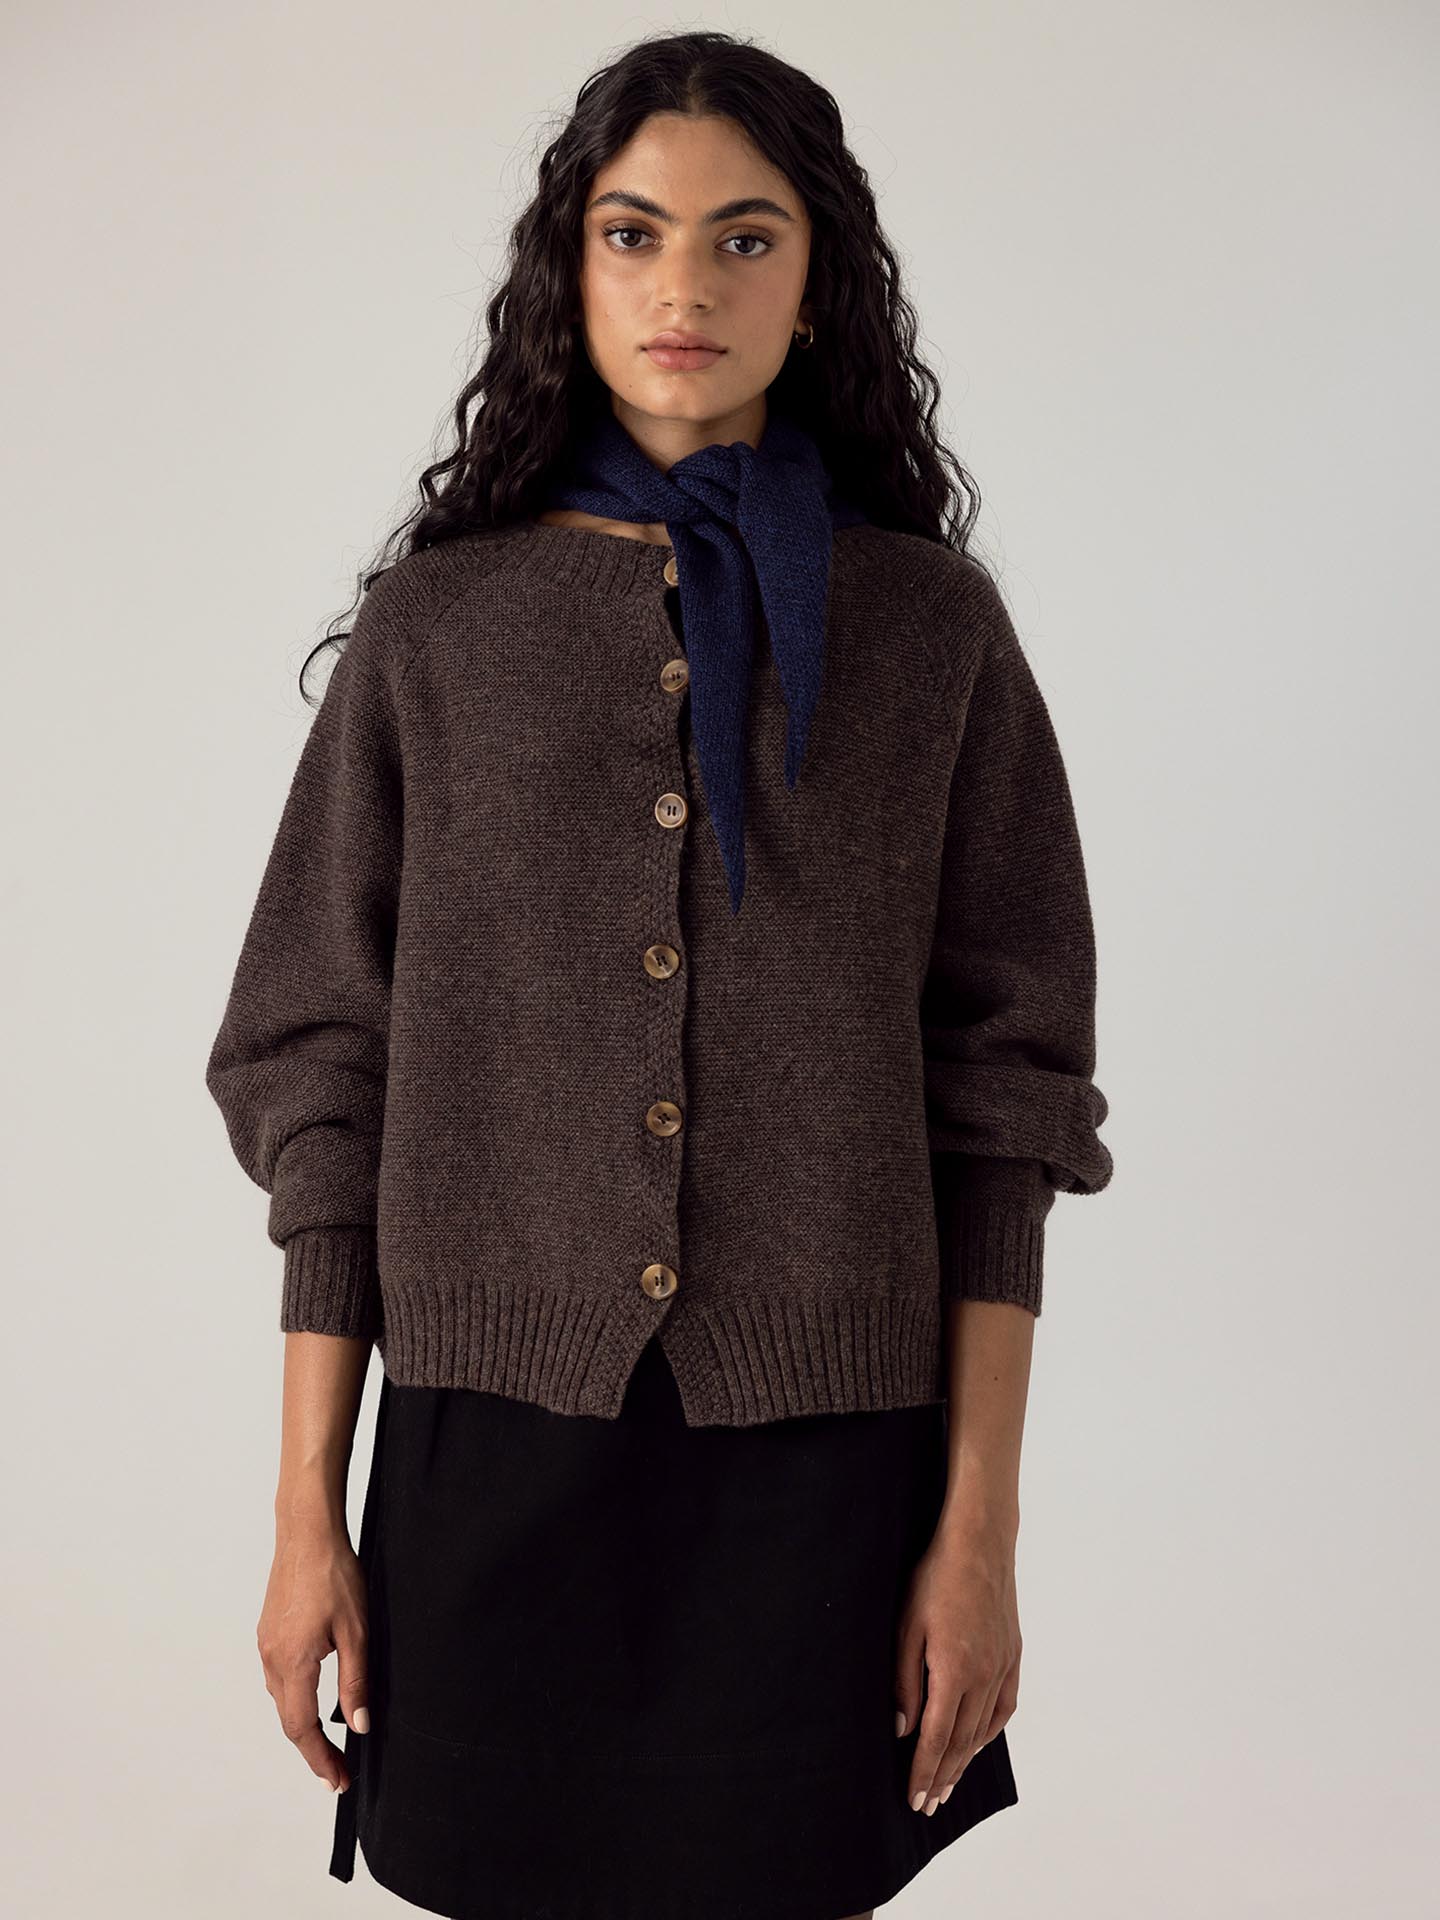 The model is wearing a brown cardigan, made from 100% Extra-fine Merino Wool, and a black skirt. She is also wearing the Daisy Scarf in Midnight from Francie.